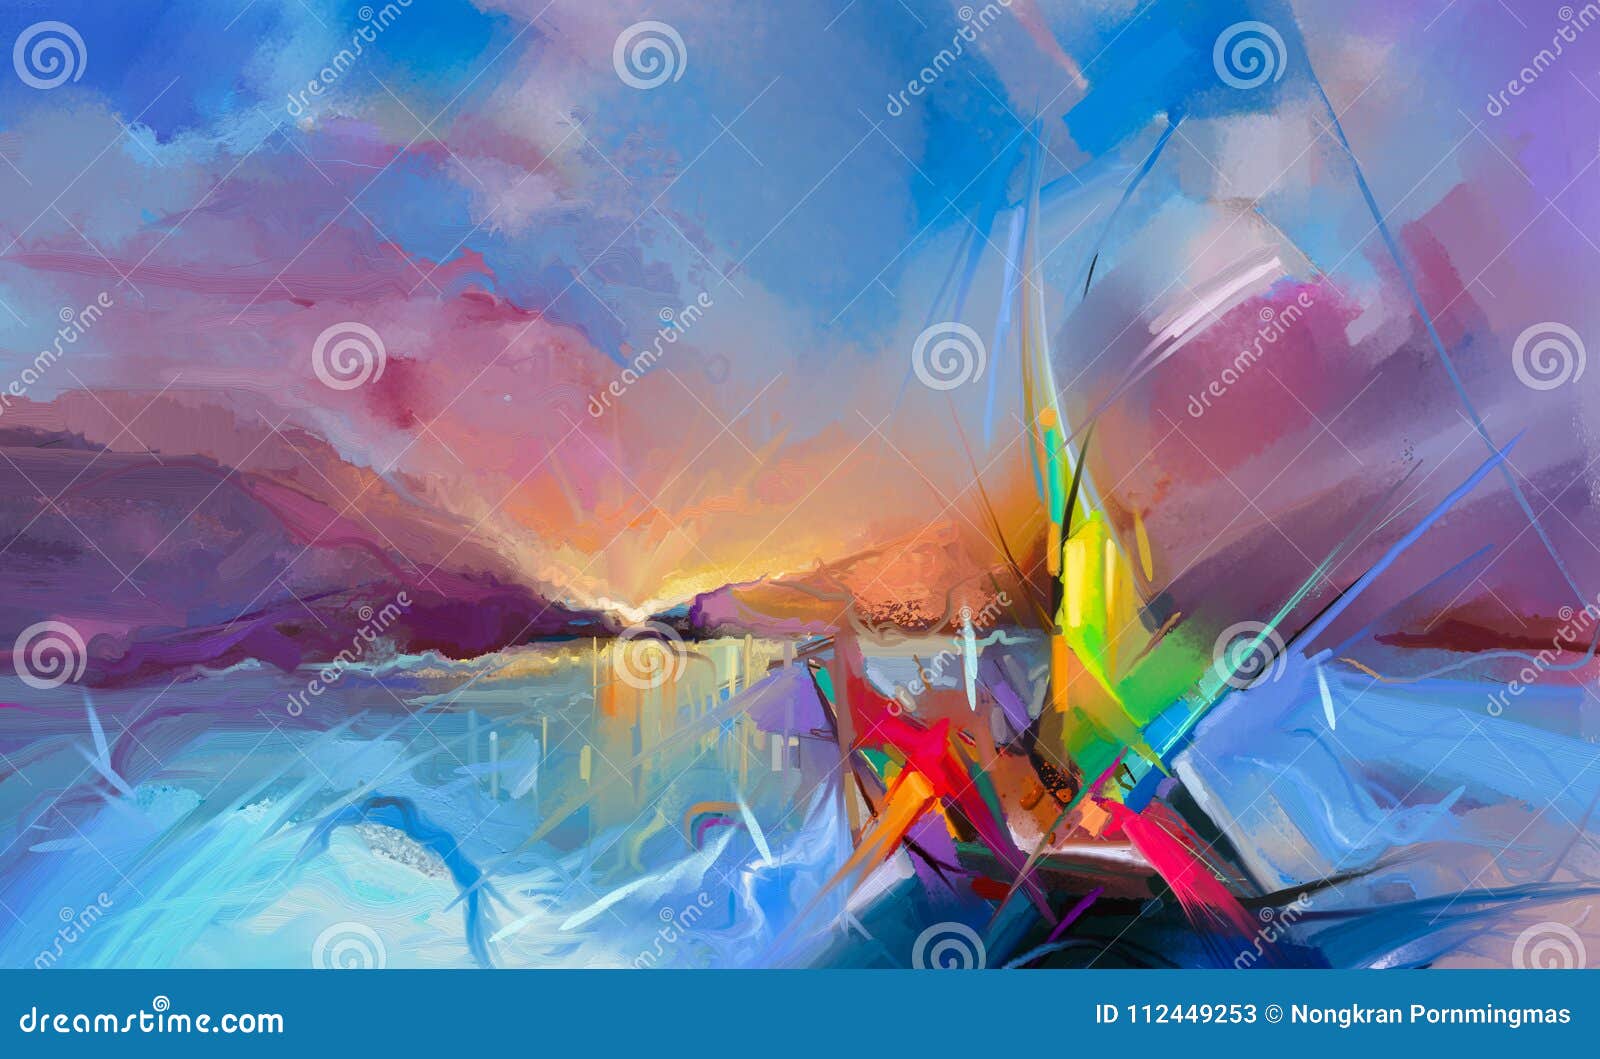 colorful oil painting on canvas texture. semi- abstract image of seascape paintings with sunlight background